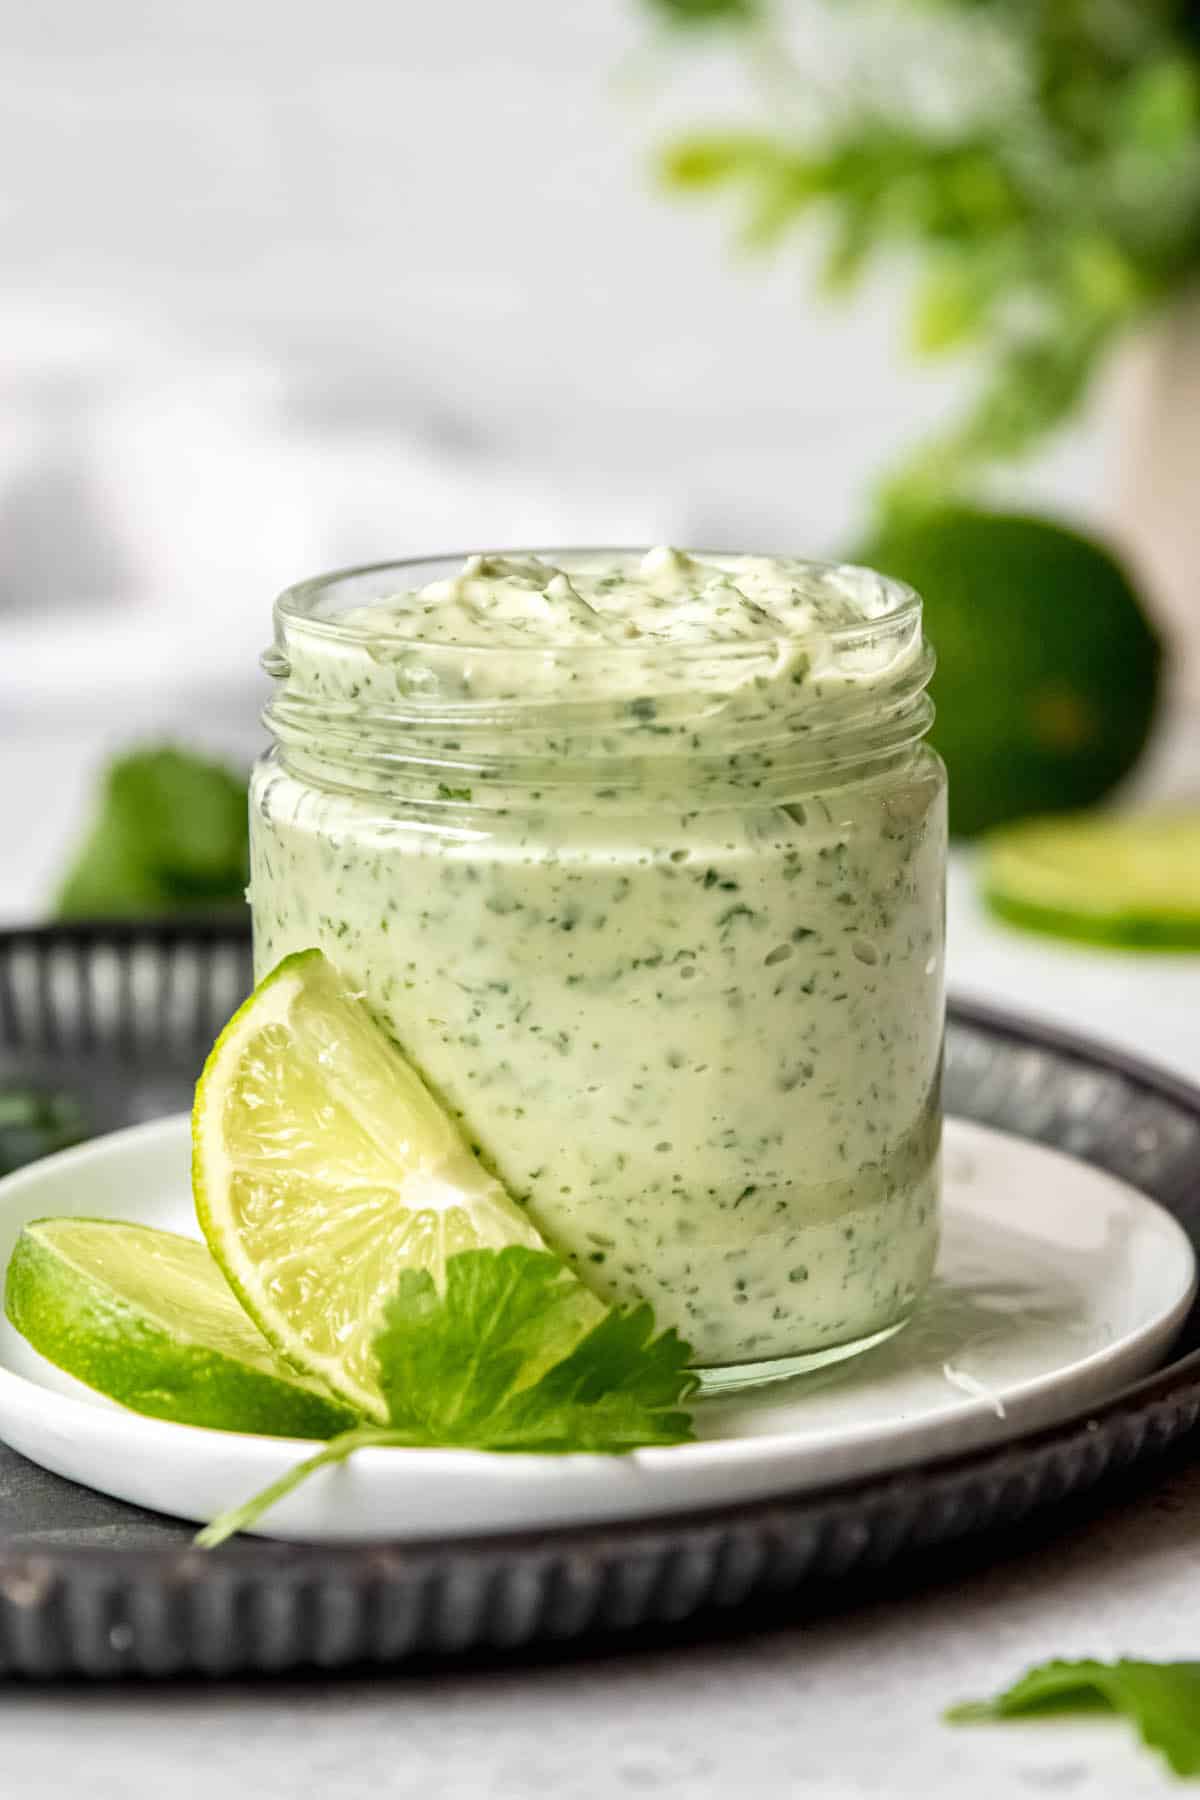 creamy jalapeno sauce with garlic, lime, cilantro and mayo in a small glass jar with slices of lime leaning against it.